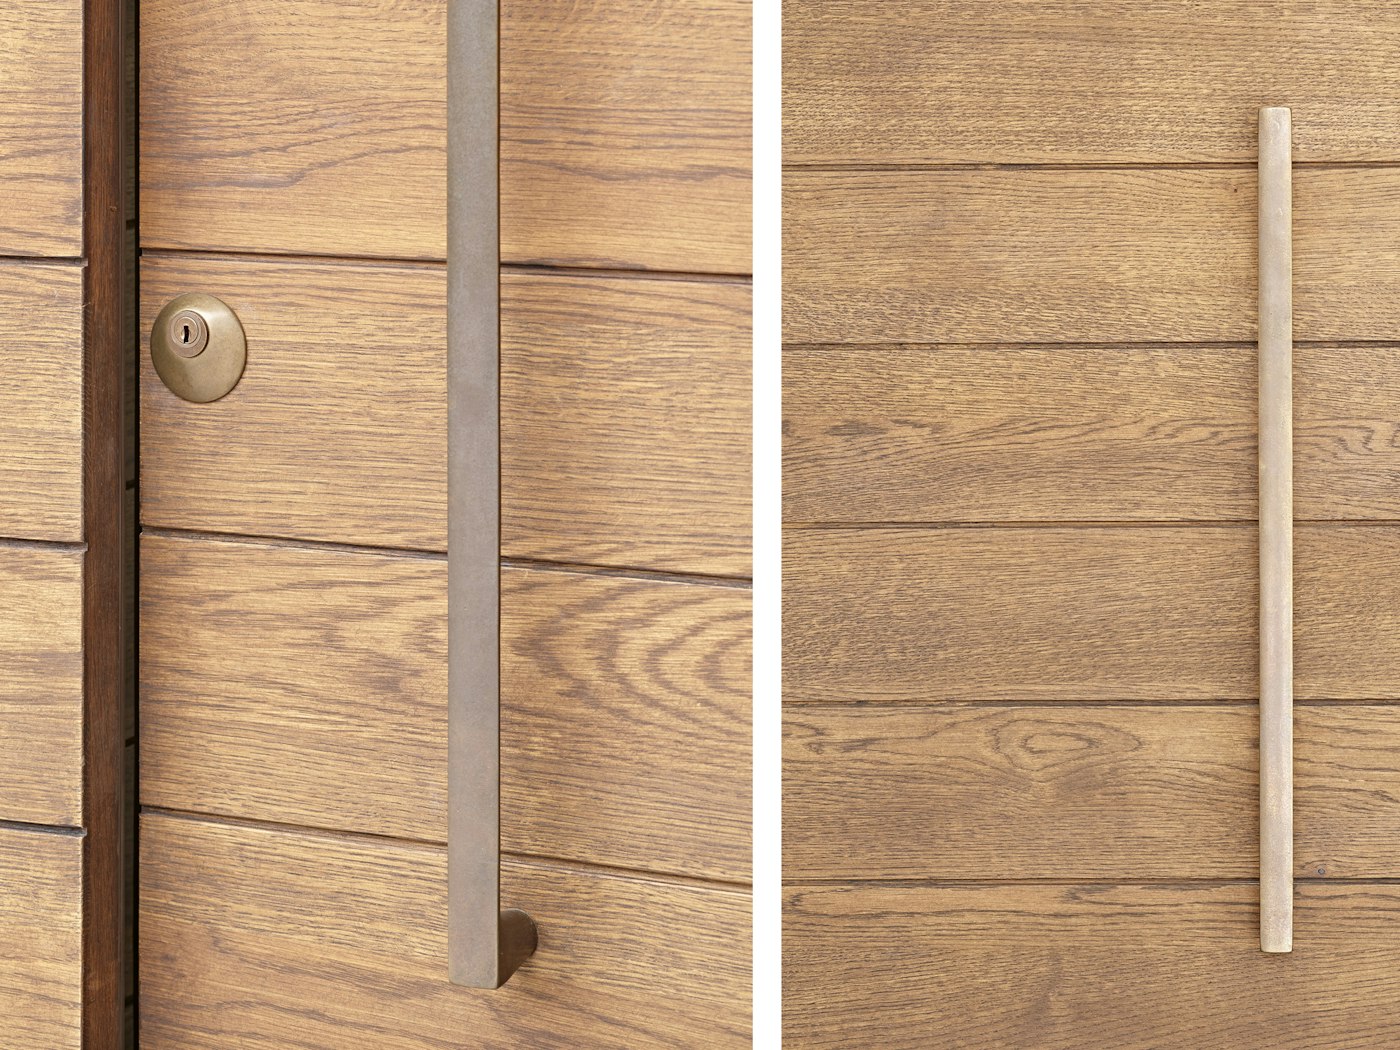 Created in oak, the door was stained walnut on site by the client. Our BZ5 bronze handle adds the finishing touch.